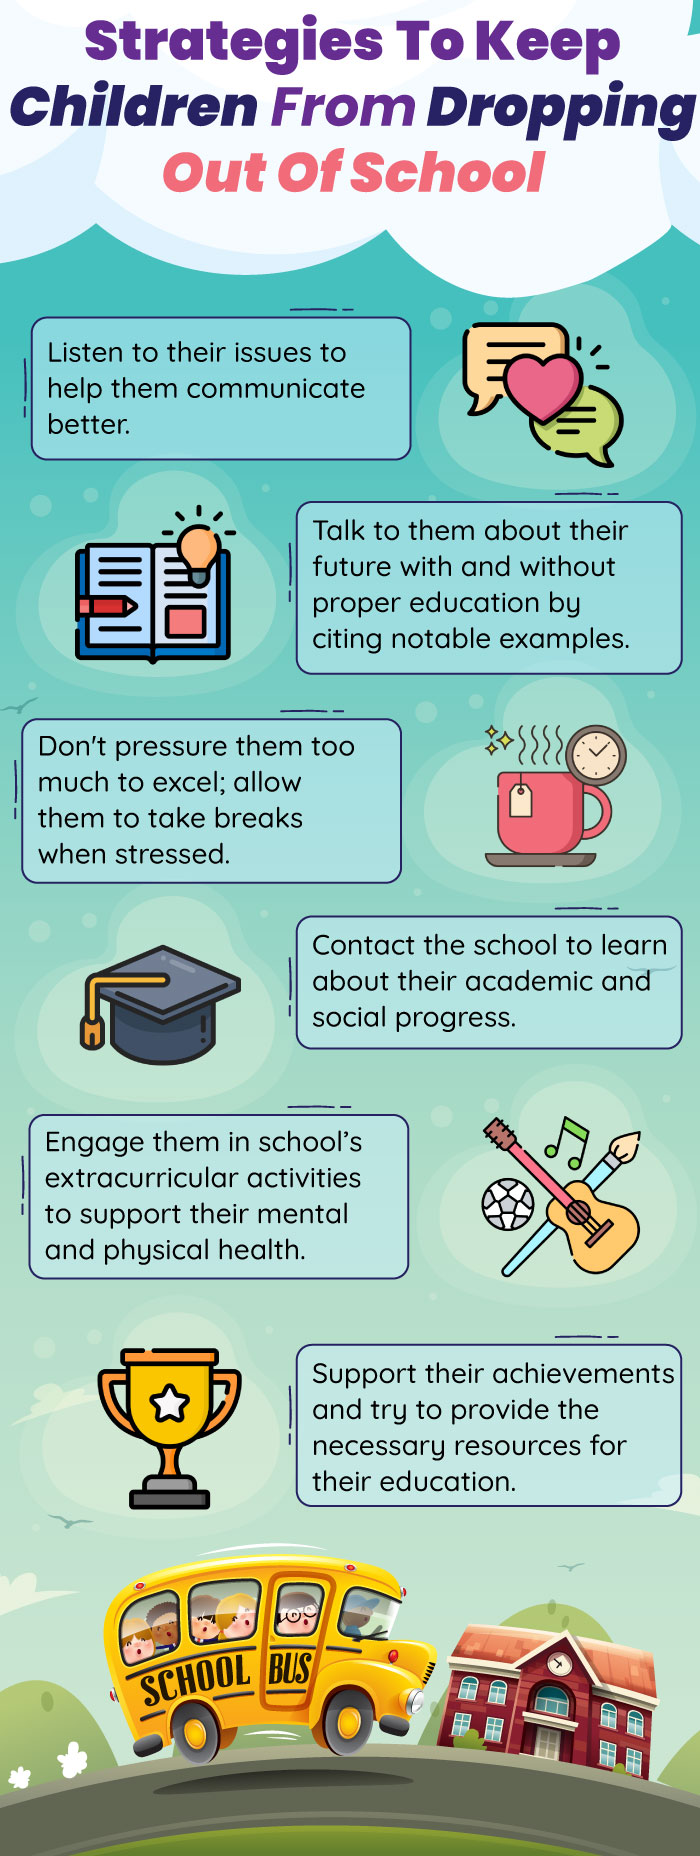 strategies to keep children from dropping out of school (infographic)